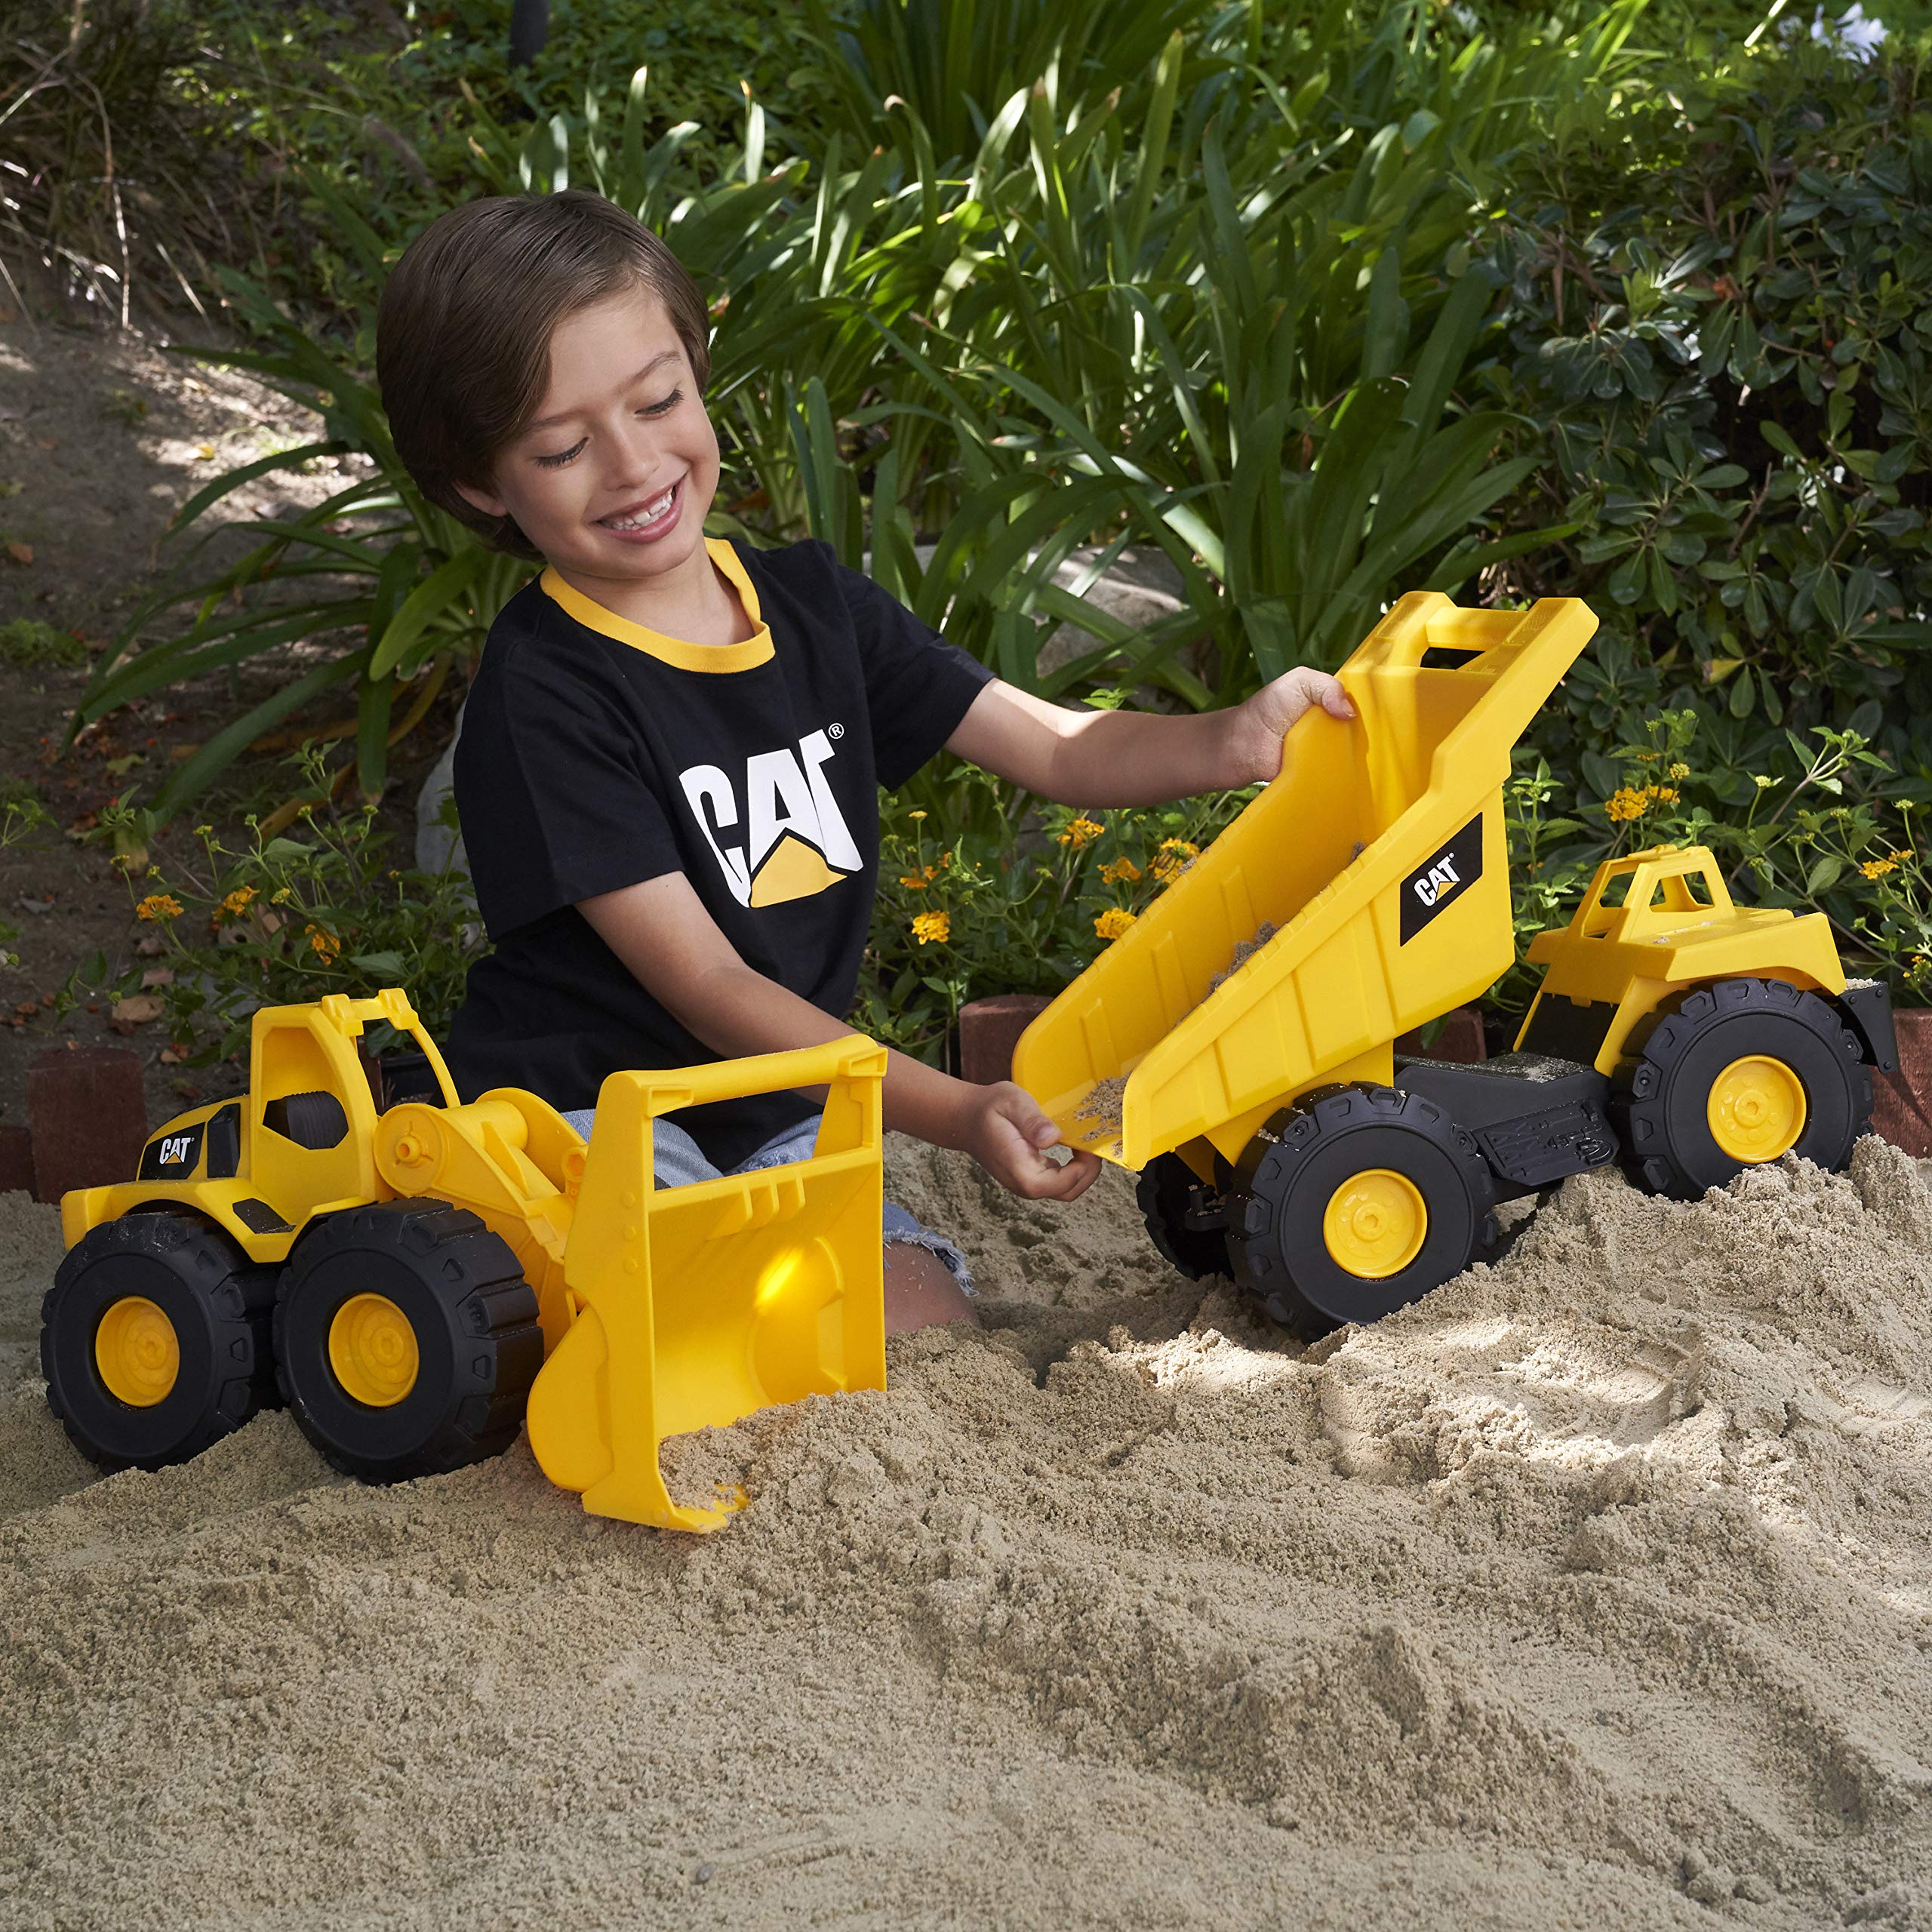 CAT Construction Toys, Tough Rigs 15" Dump Truck & Loader Set Toys 2 Pack Ages 2+, Kid Powered CATerpillar Vehicle Set, Indoor or Outdoor Play, No Batteries Required